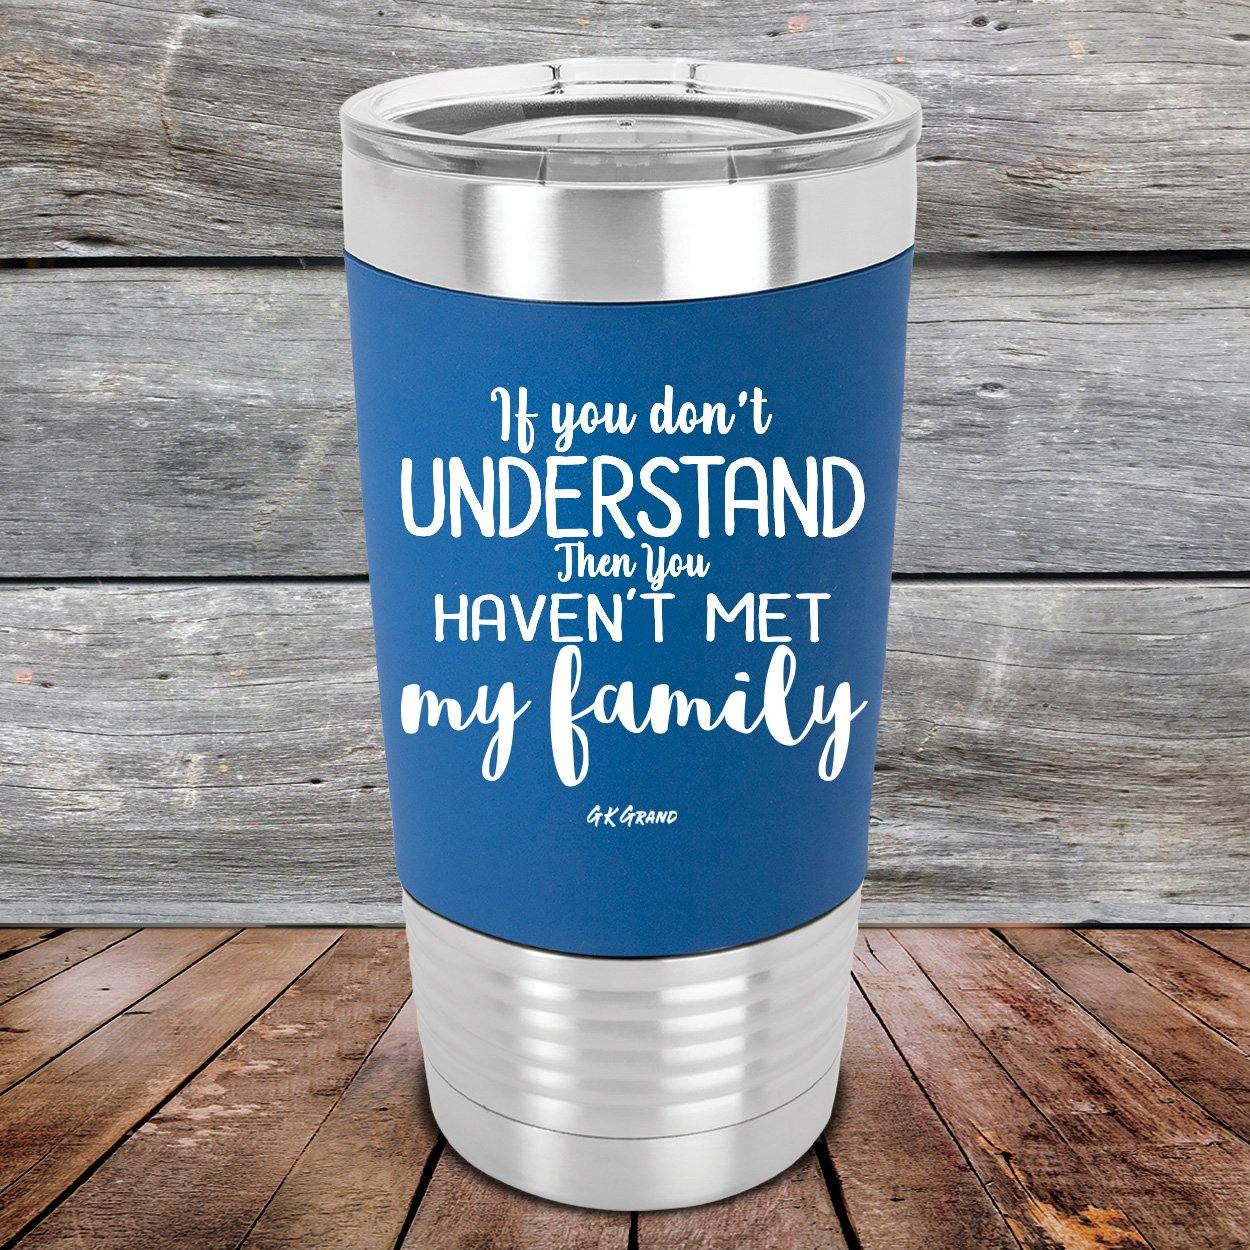 If You Dont Understand Then You Haven't Met My Family- Premium Silicone Wrapped Engraved Tumbler - GK GRAND GIFTS